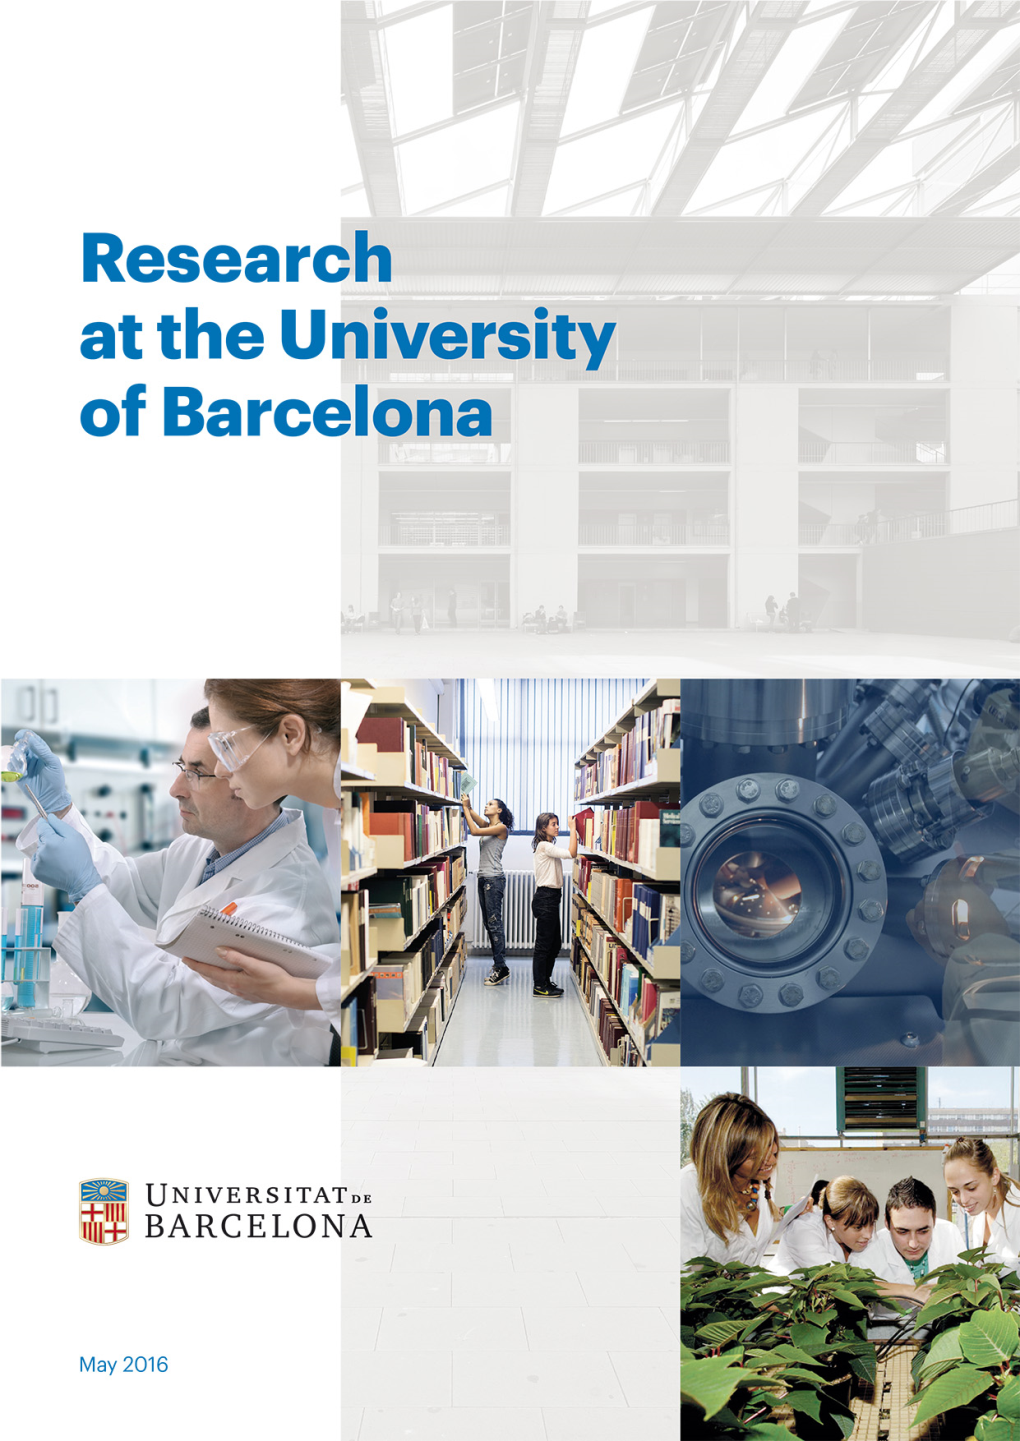 Research at the University of Barcelona